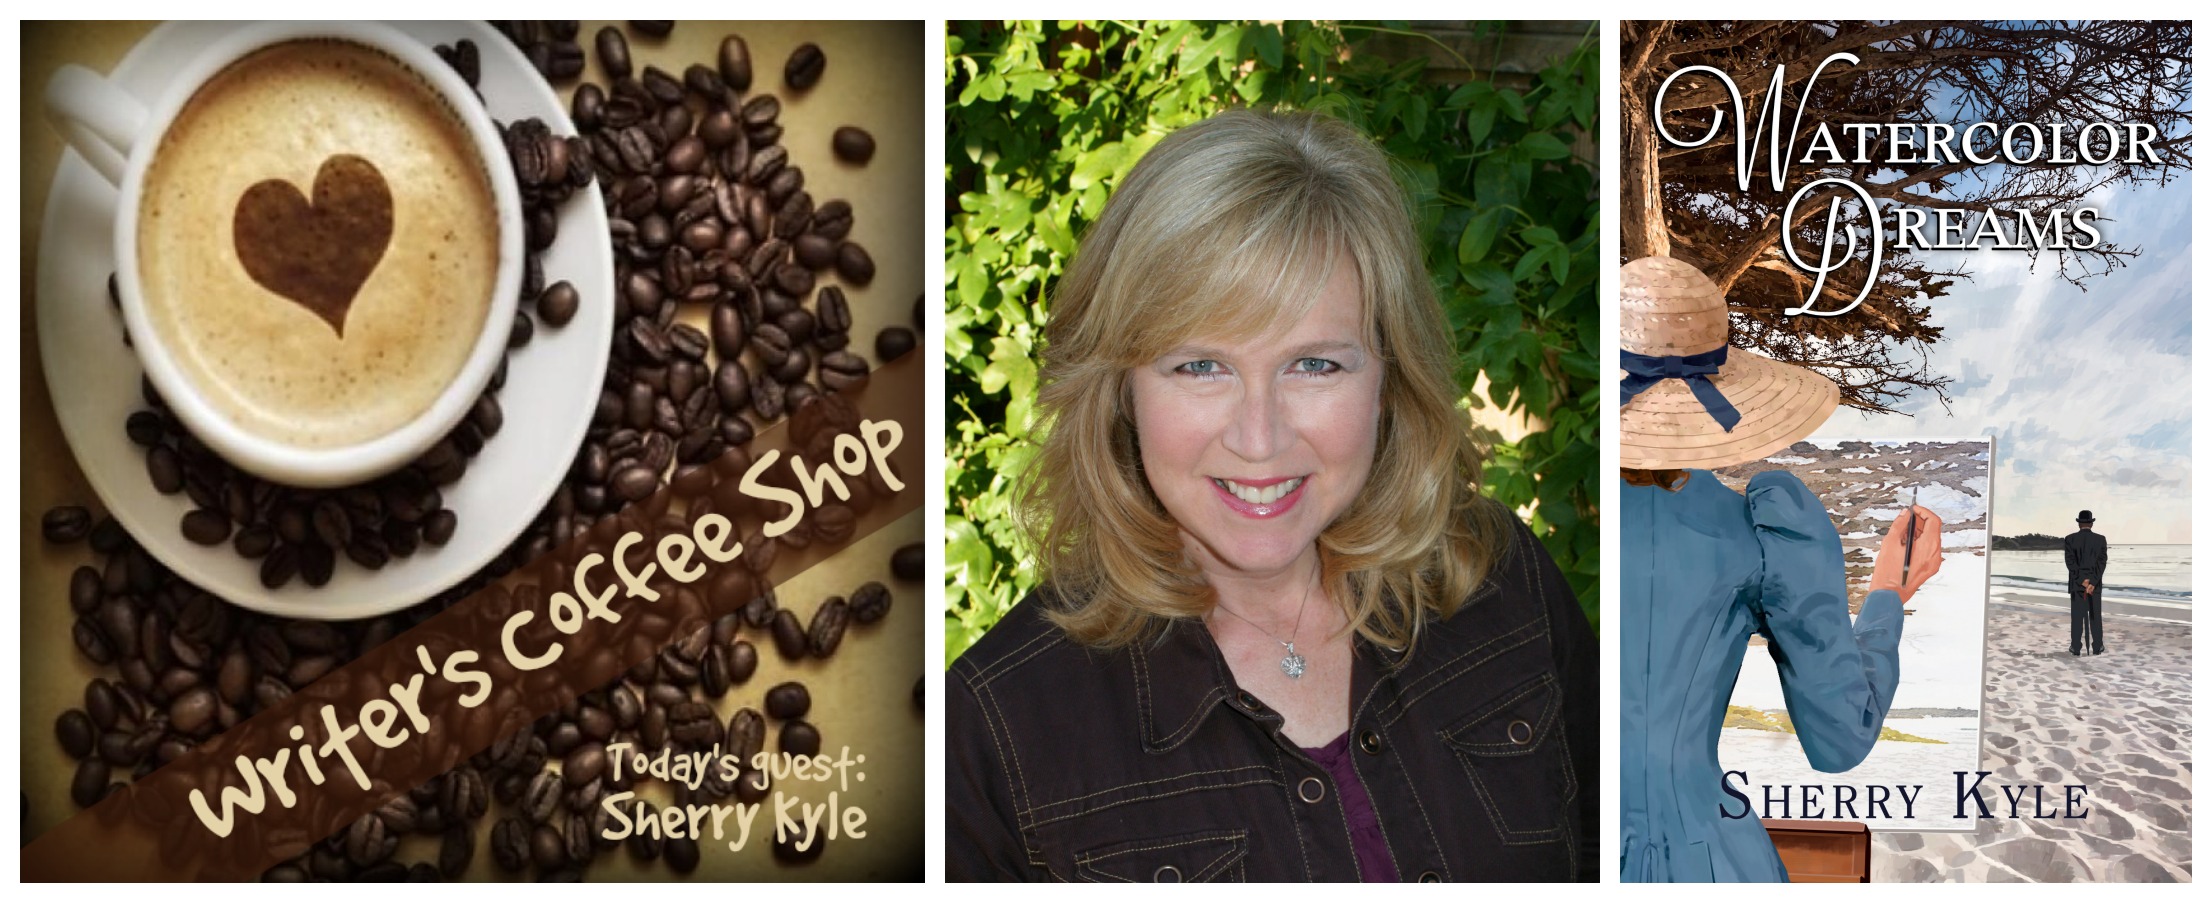 Writer’s Coffee Shop with Sherry Kyle